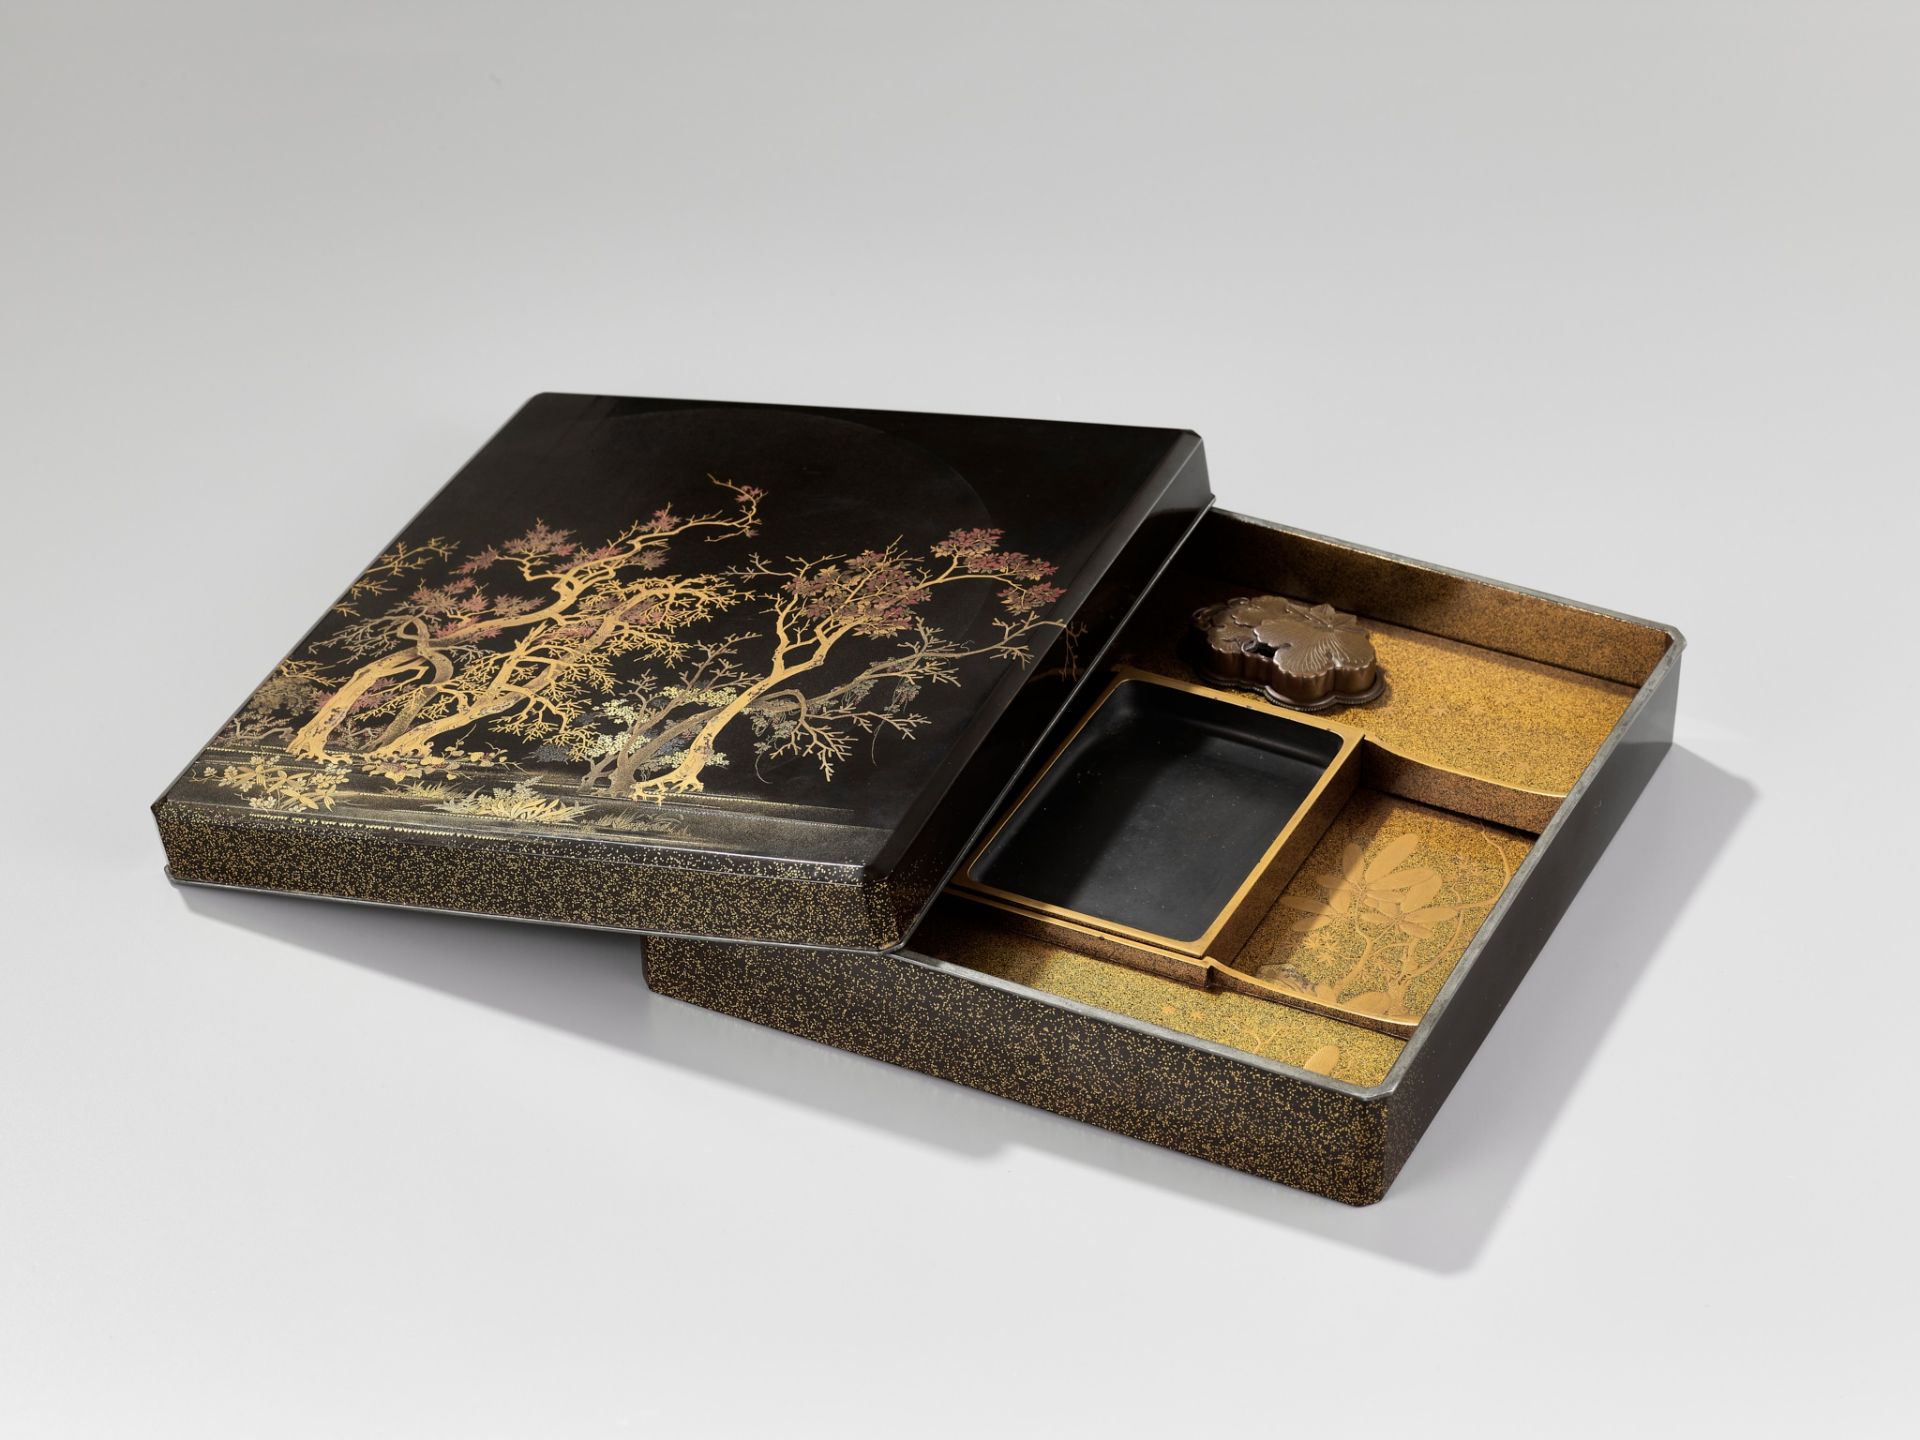 A SUPERB LACQUER SUZURIBAKO (WRITING BOX) DEPICTING A MOONLIT FOREST - Image 11 of 15